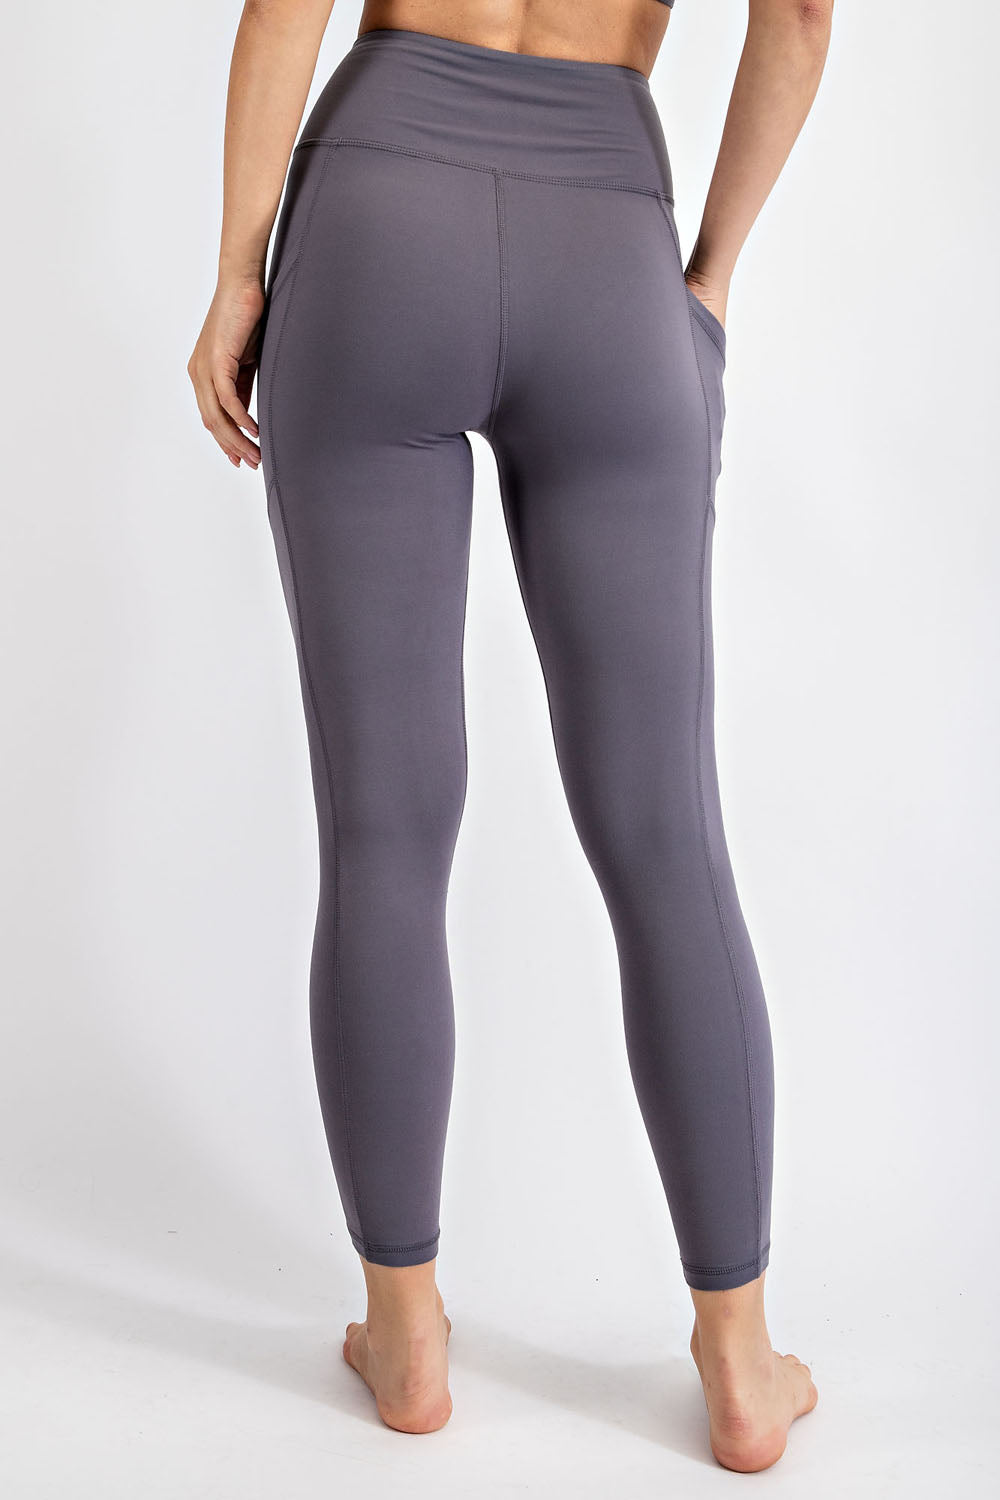 Elietian Ribbed Seamless High Waisted Legging - New Moon Boutique